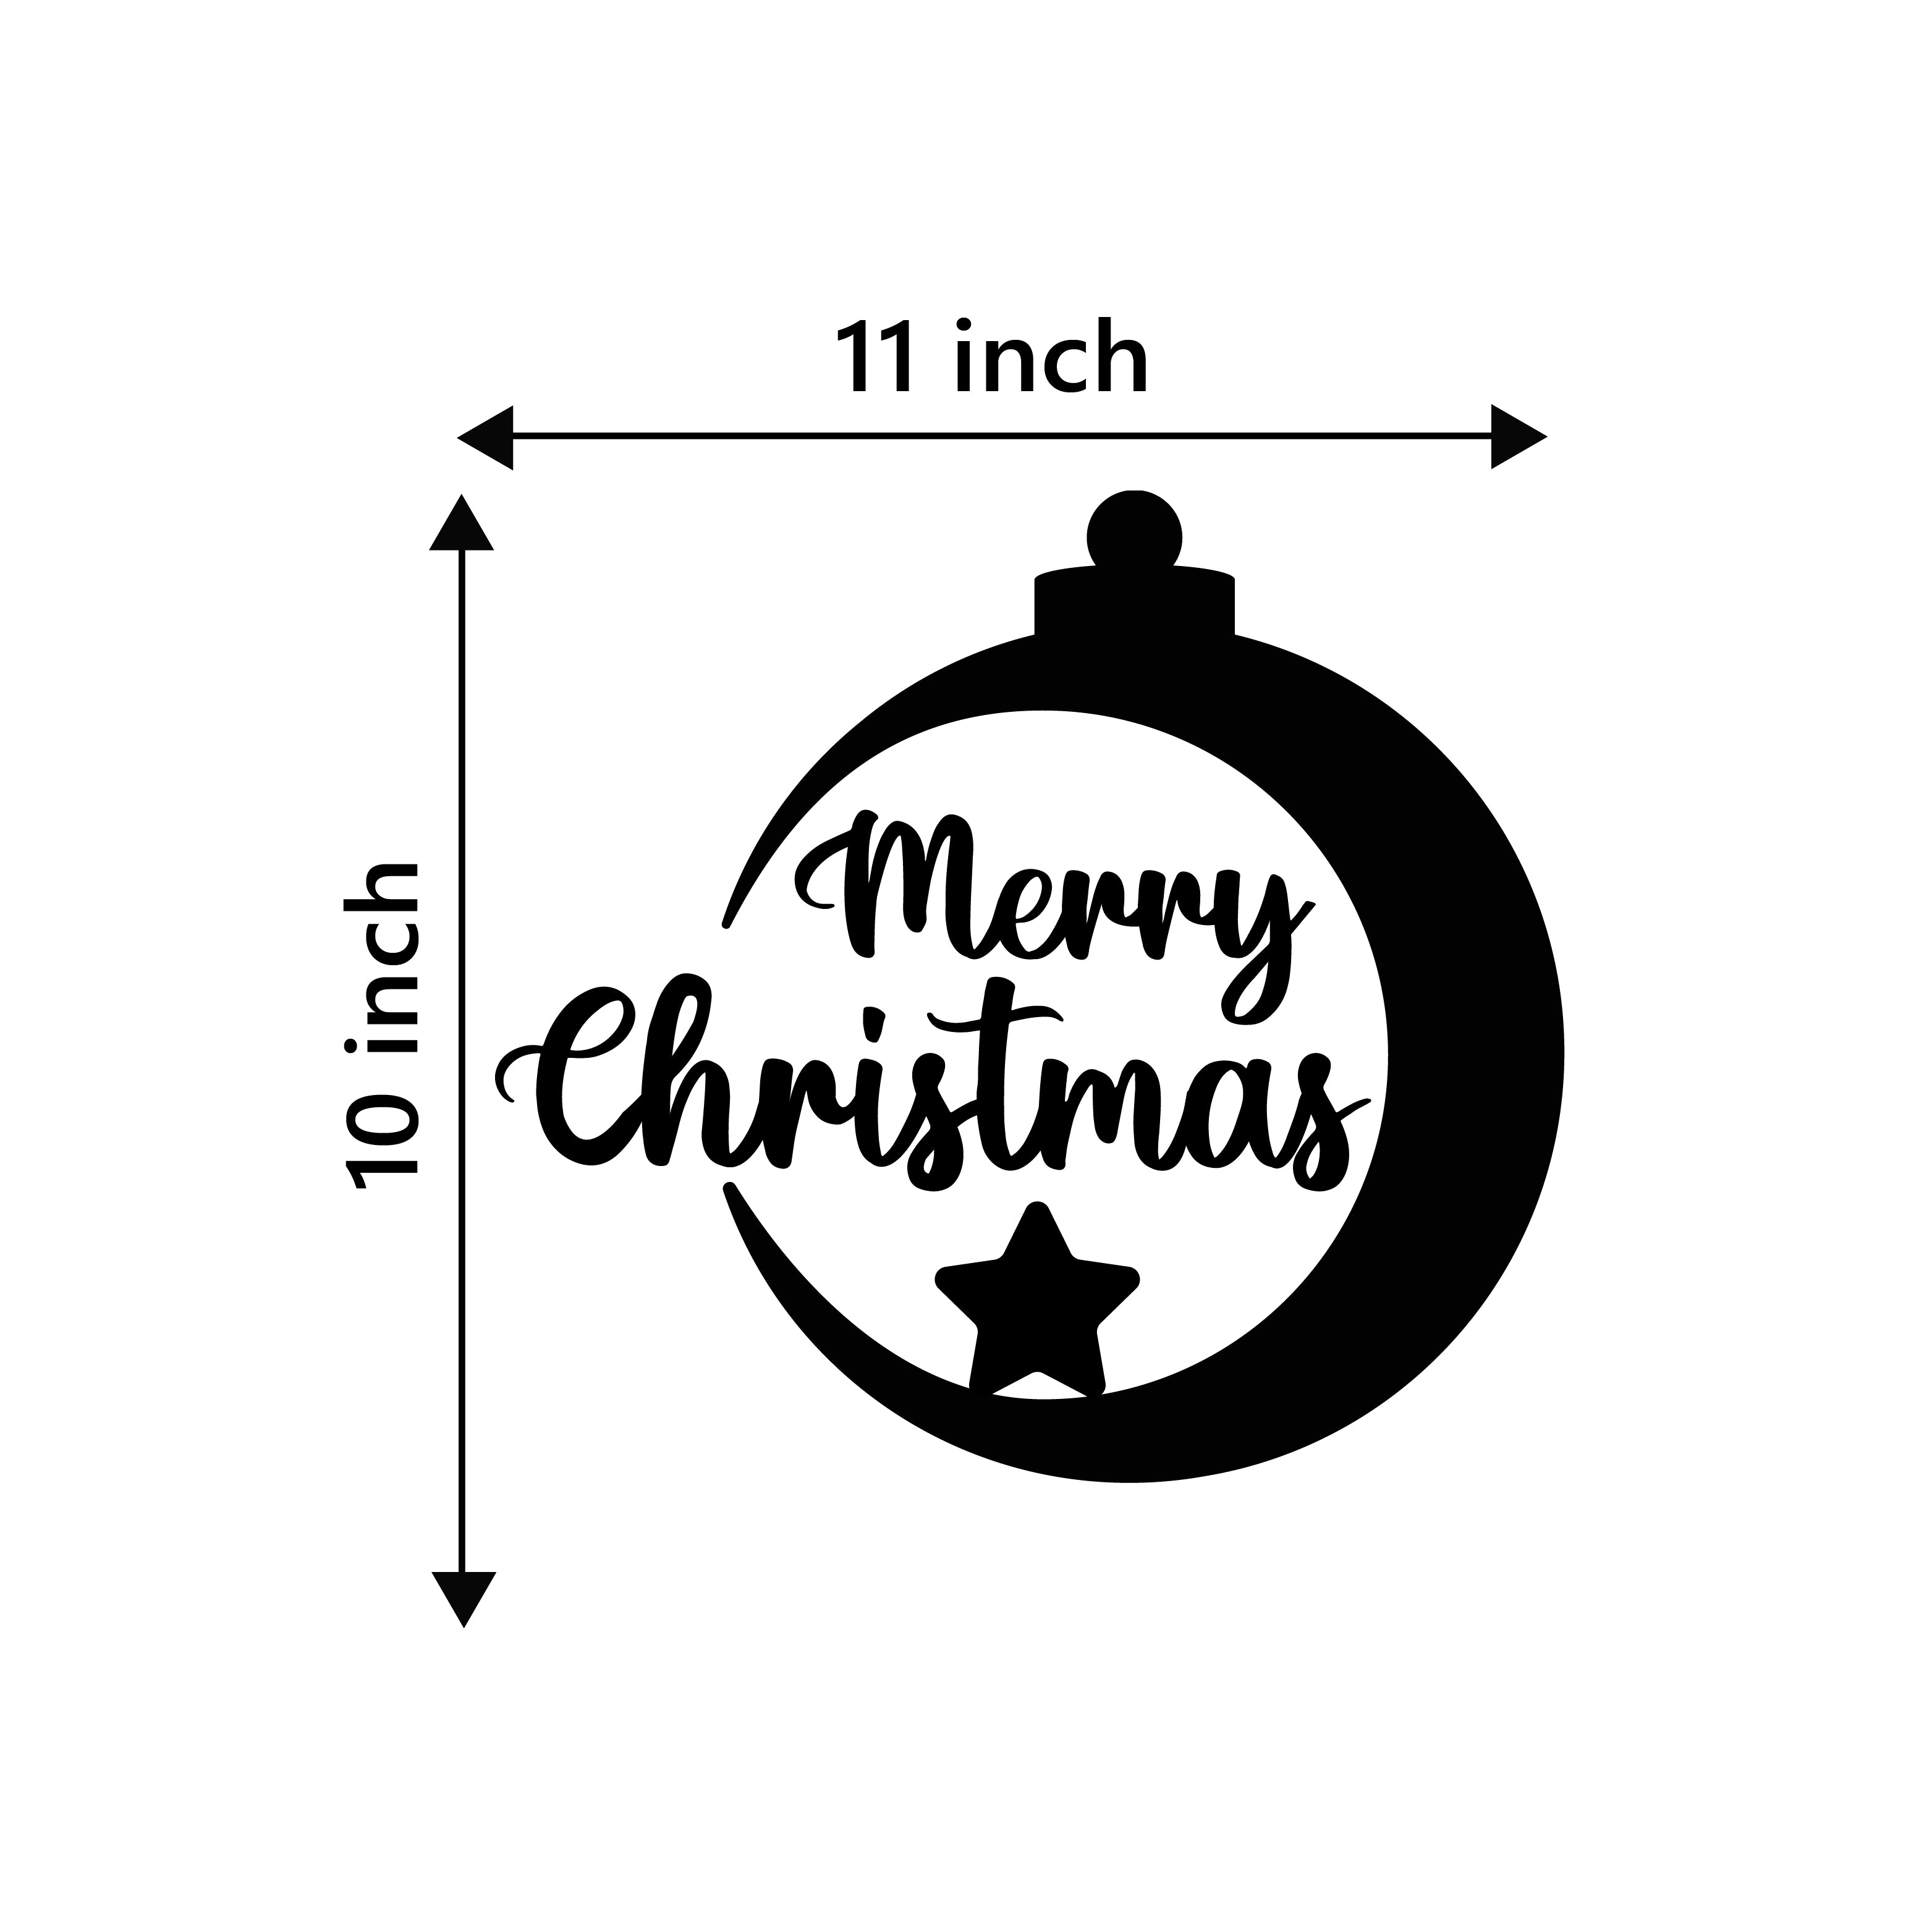 "Merry Christmas Bell" Black Engineered Wood Wall Art Cutout, Ready to Hang Home Decor 3